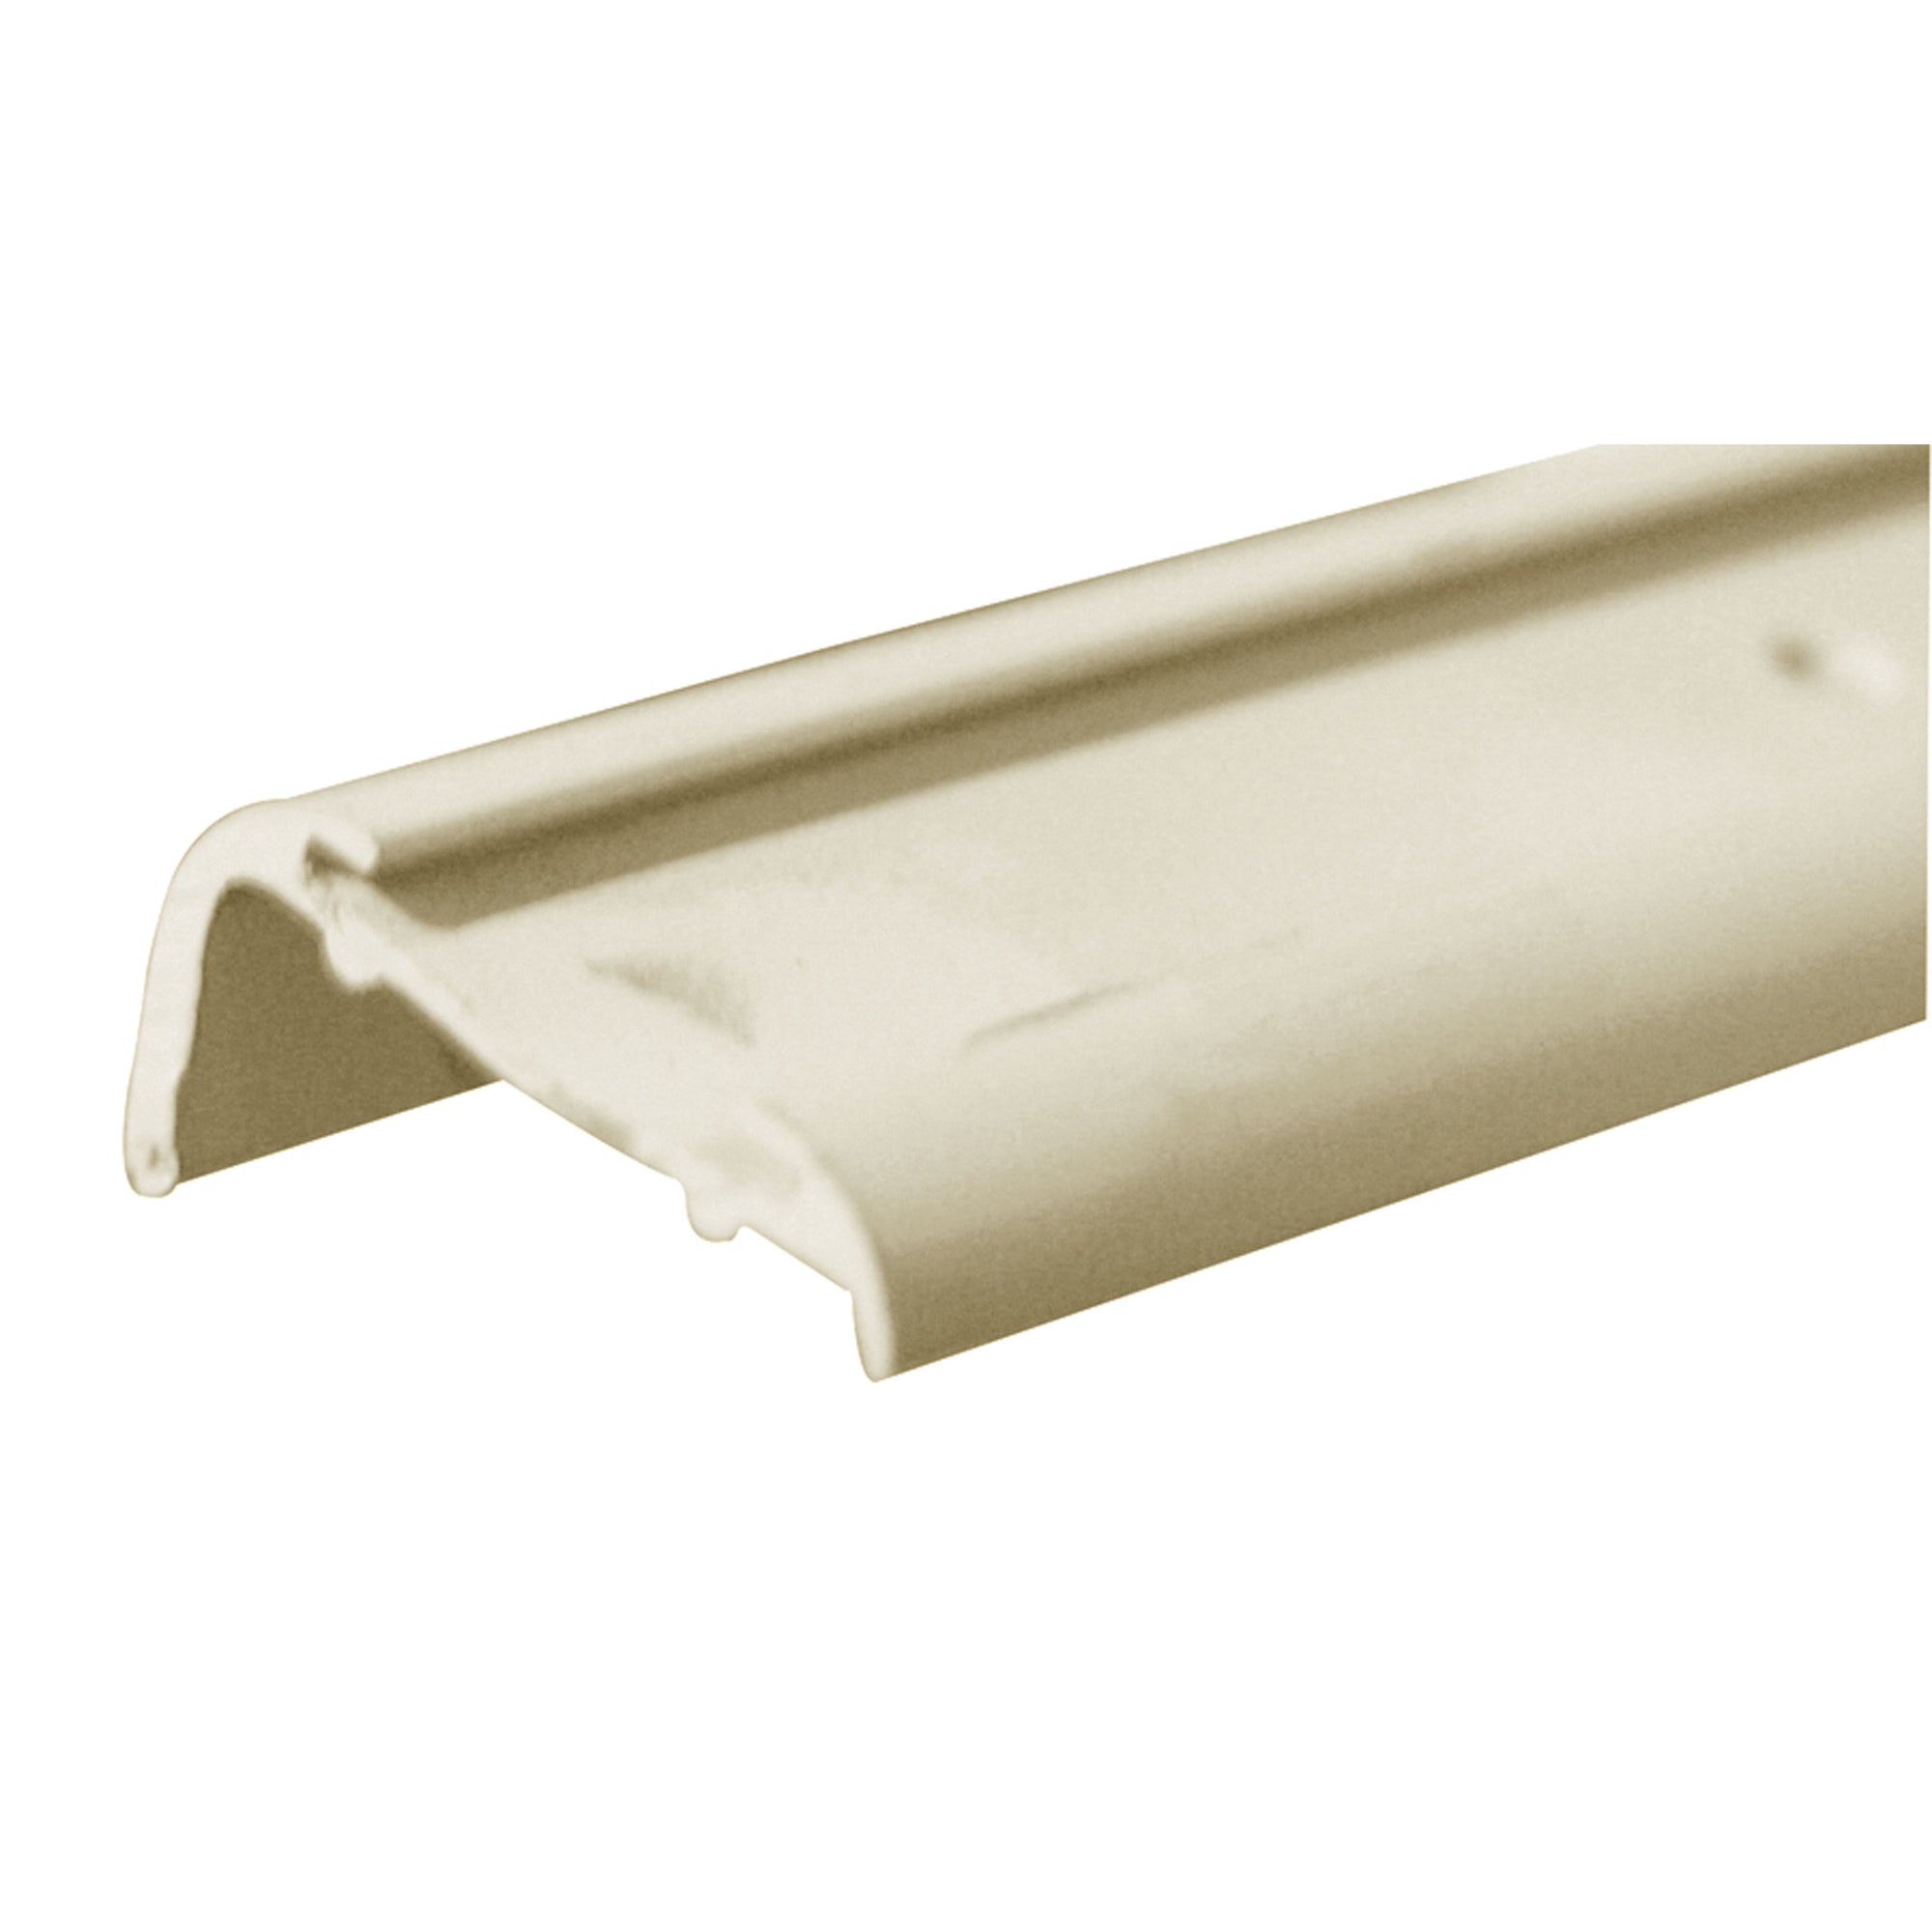 AP Products 021-57404-8 Insert Roof Edge - 8 ft. (5 Pack)